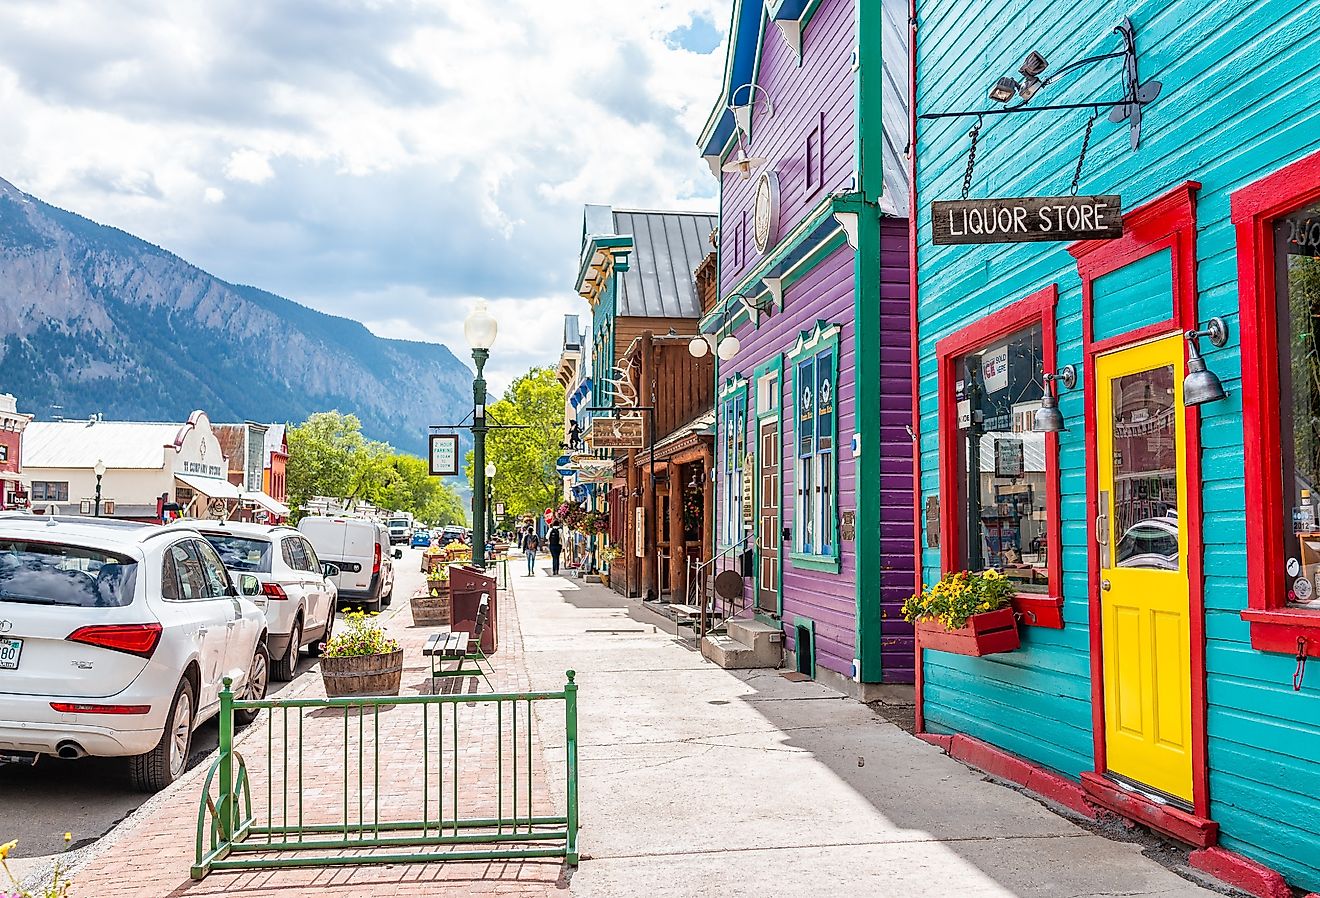 Colorful vivid village houses downtown in Crested Butte, Colorado. Image credit Kristi Blokhin via Shutterstock